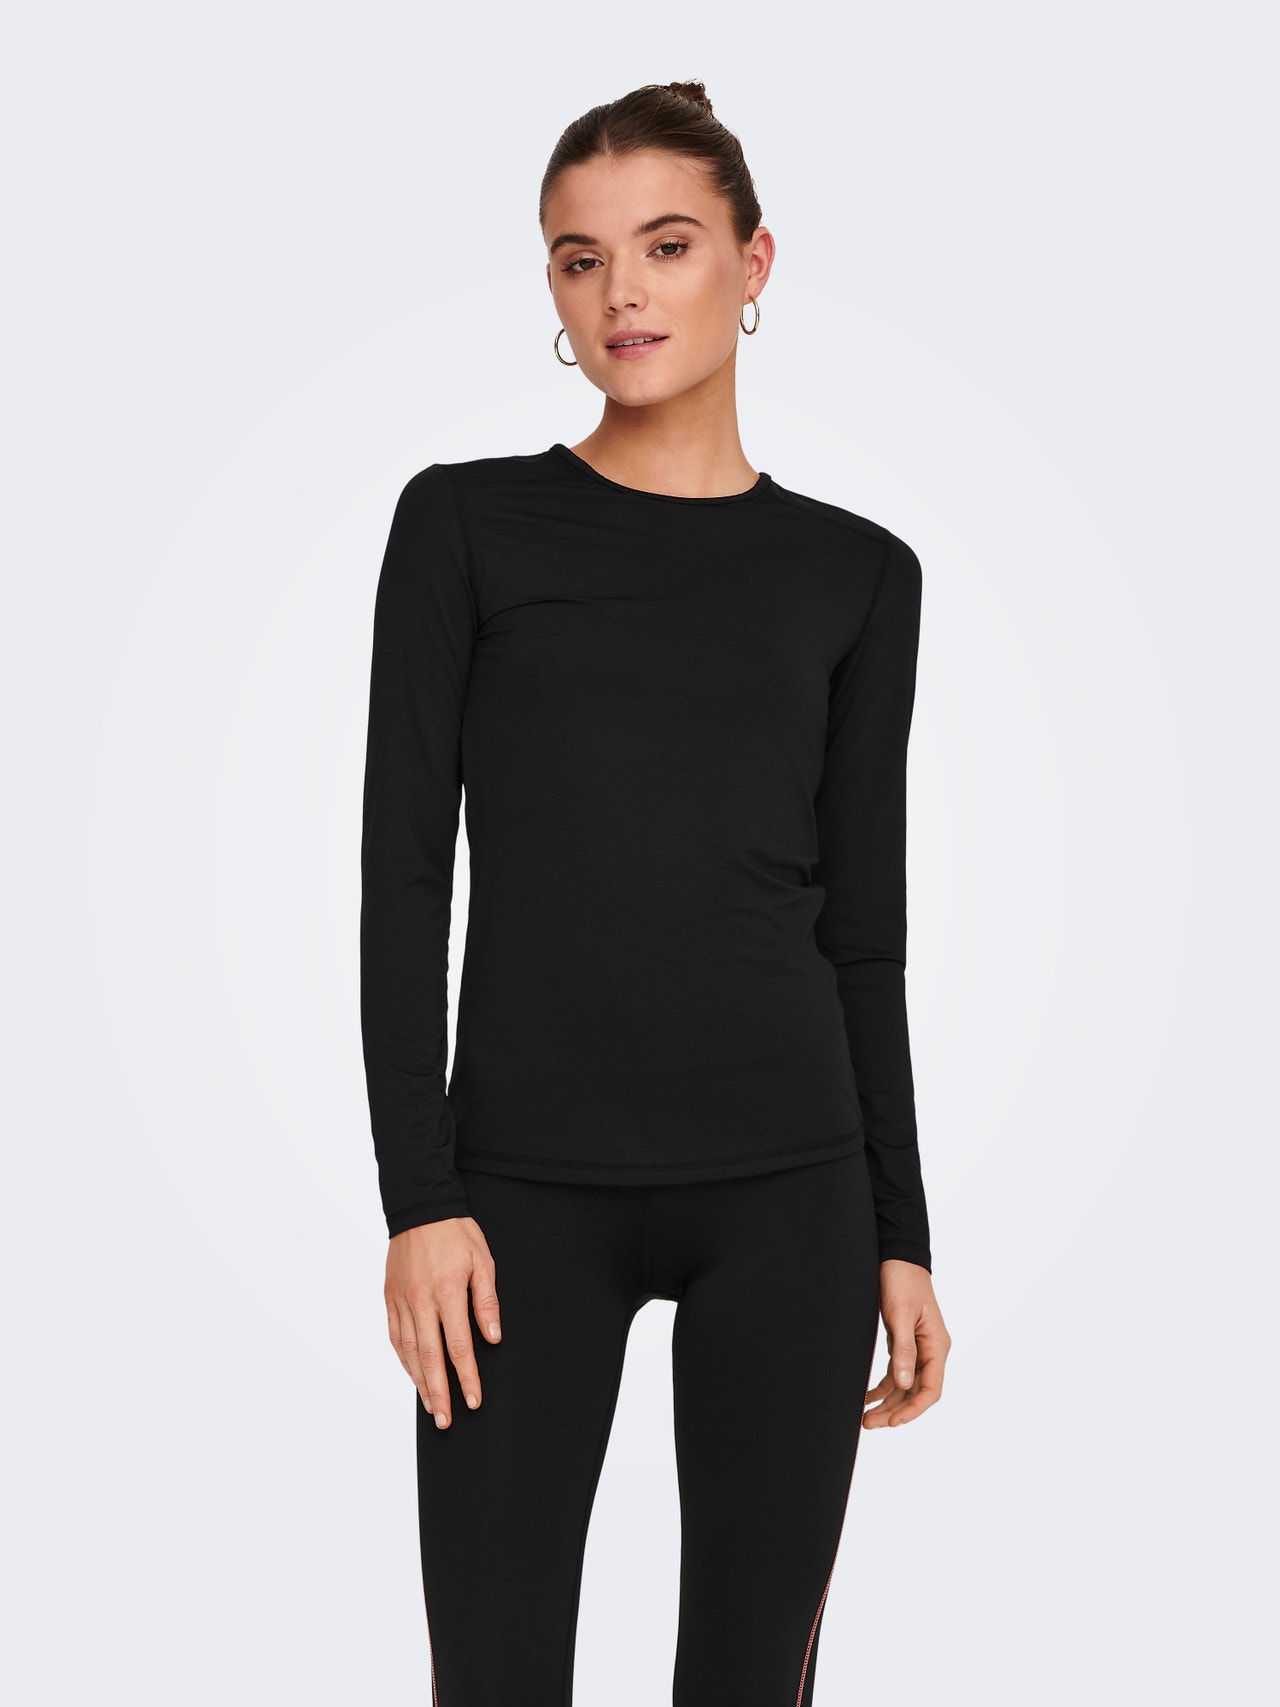 ONLY Long sleeved Training Top -Black - 15274622